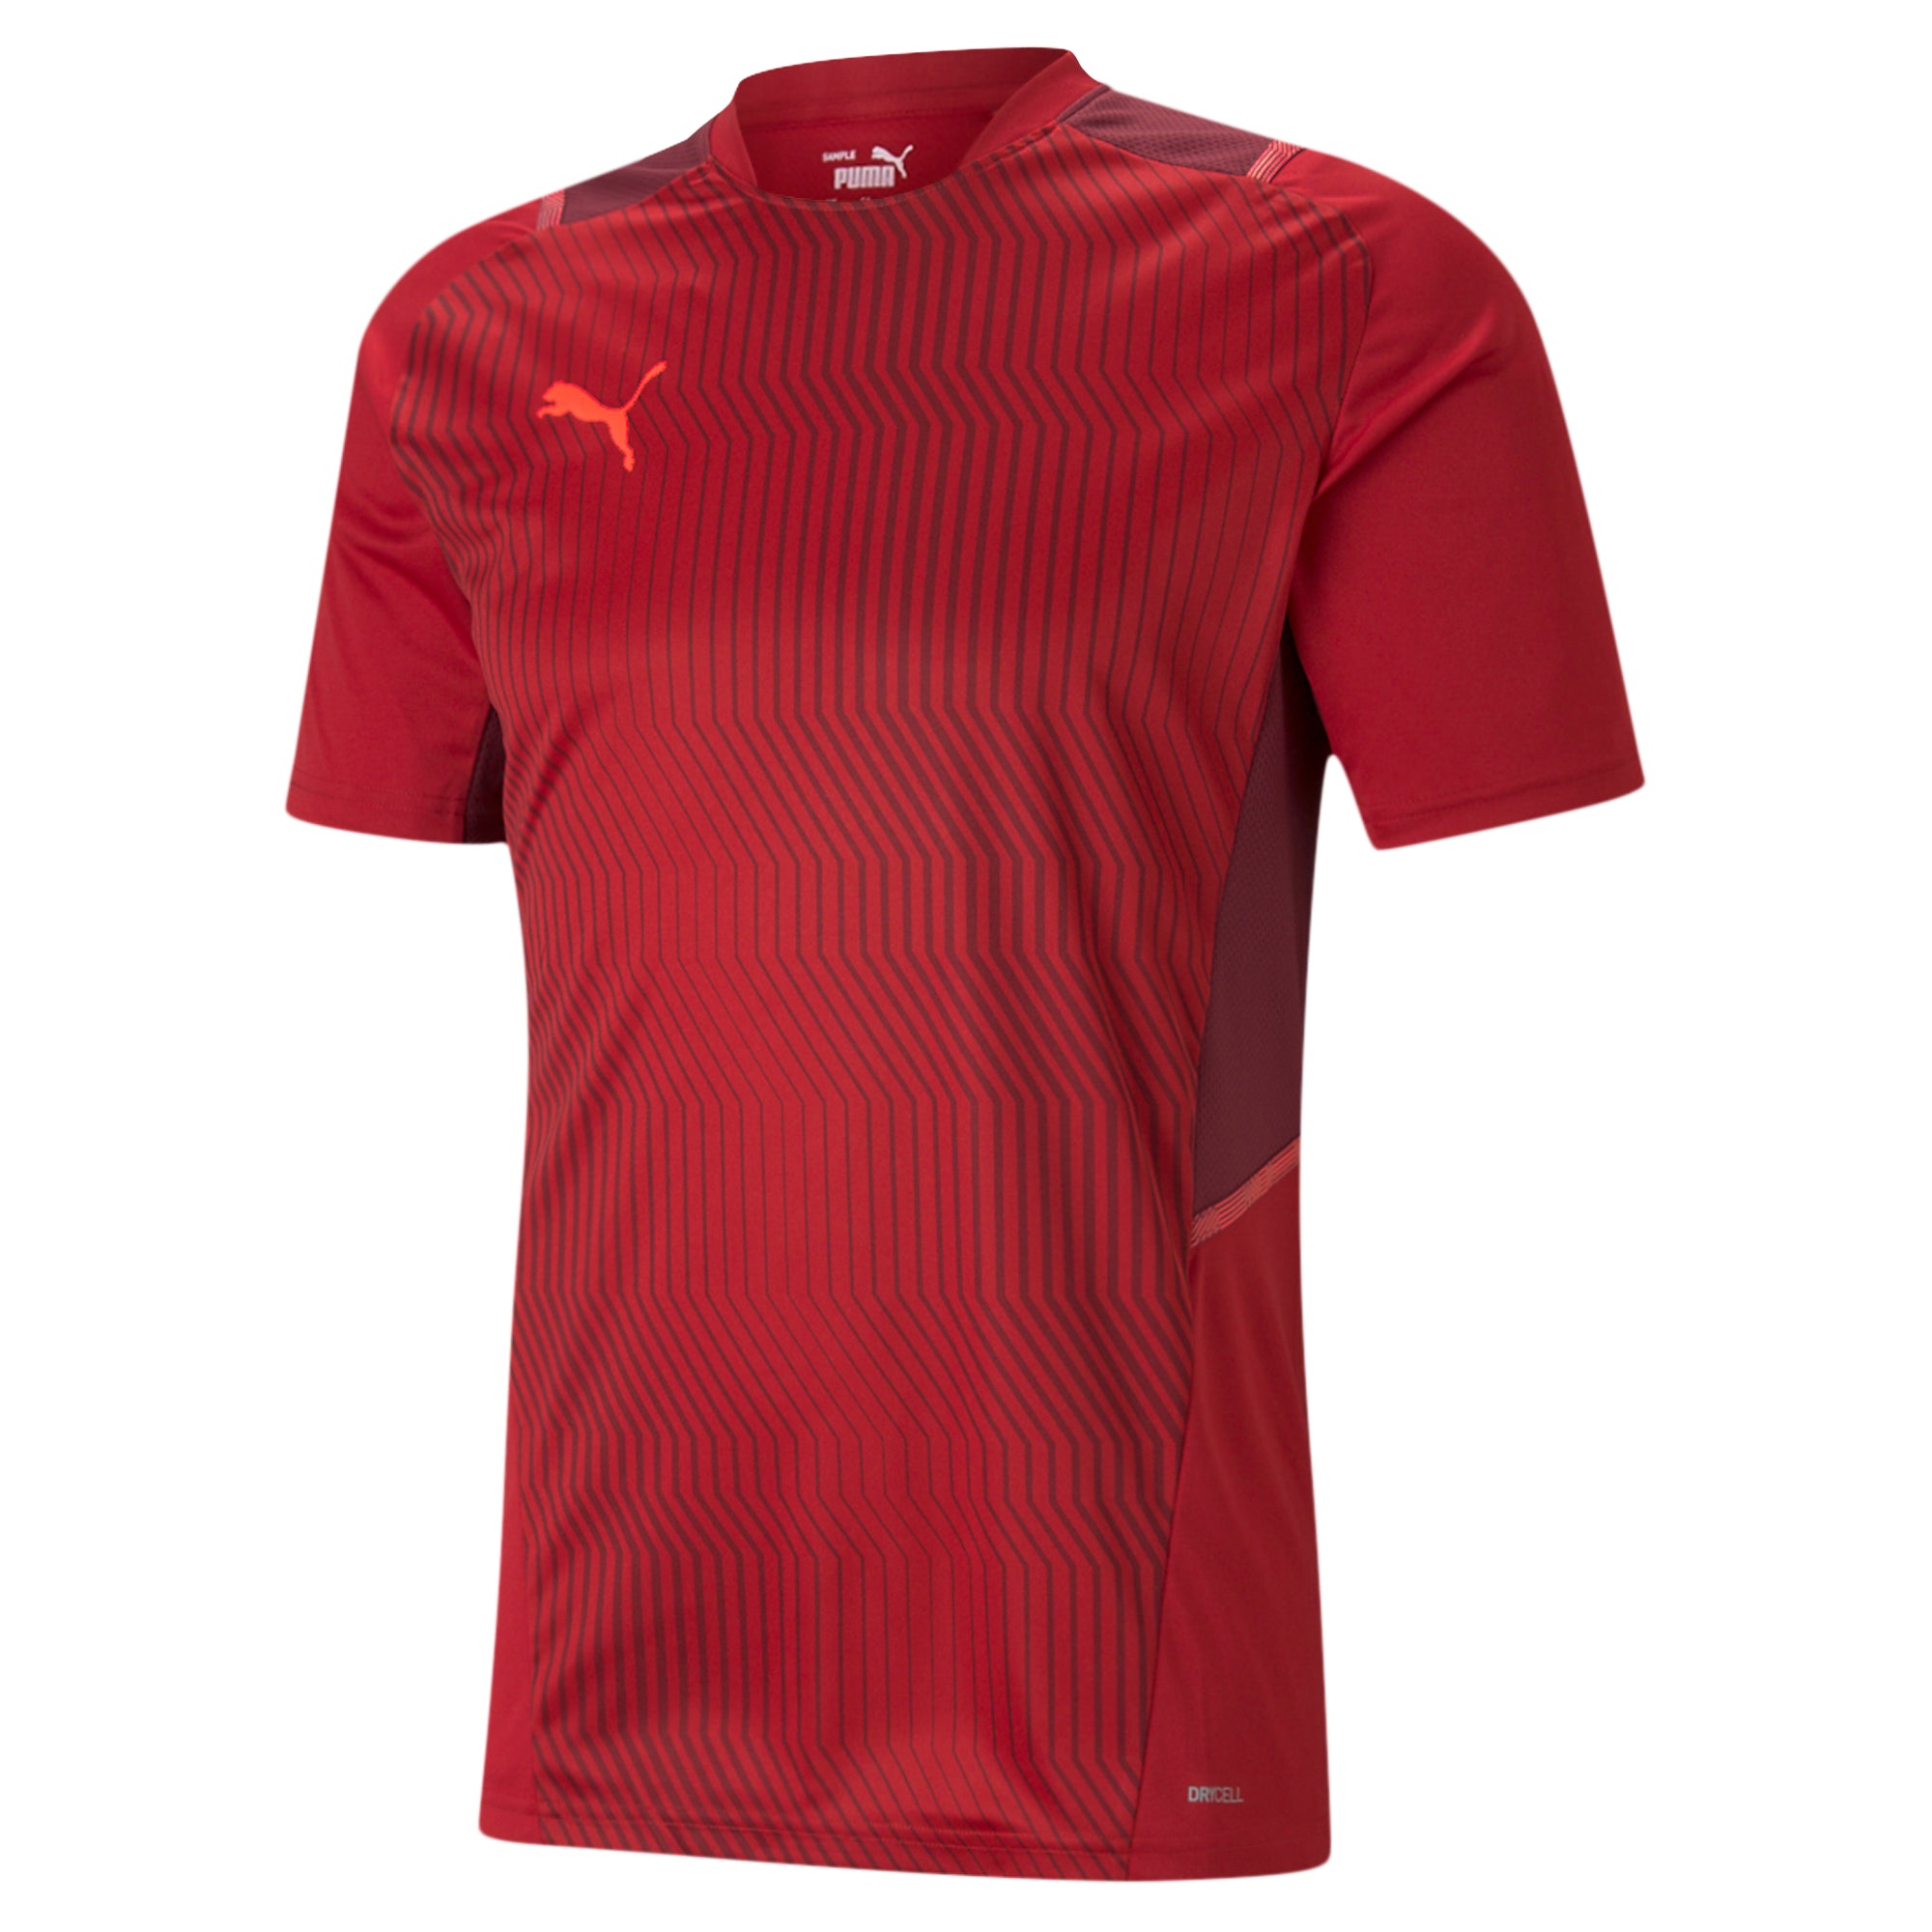 Puma Team Cup Graphic Jersey - Chilli Pepper Red